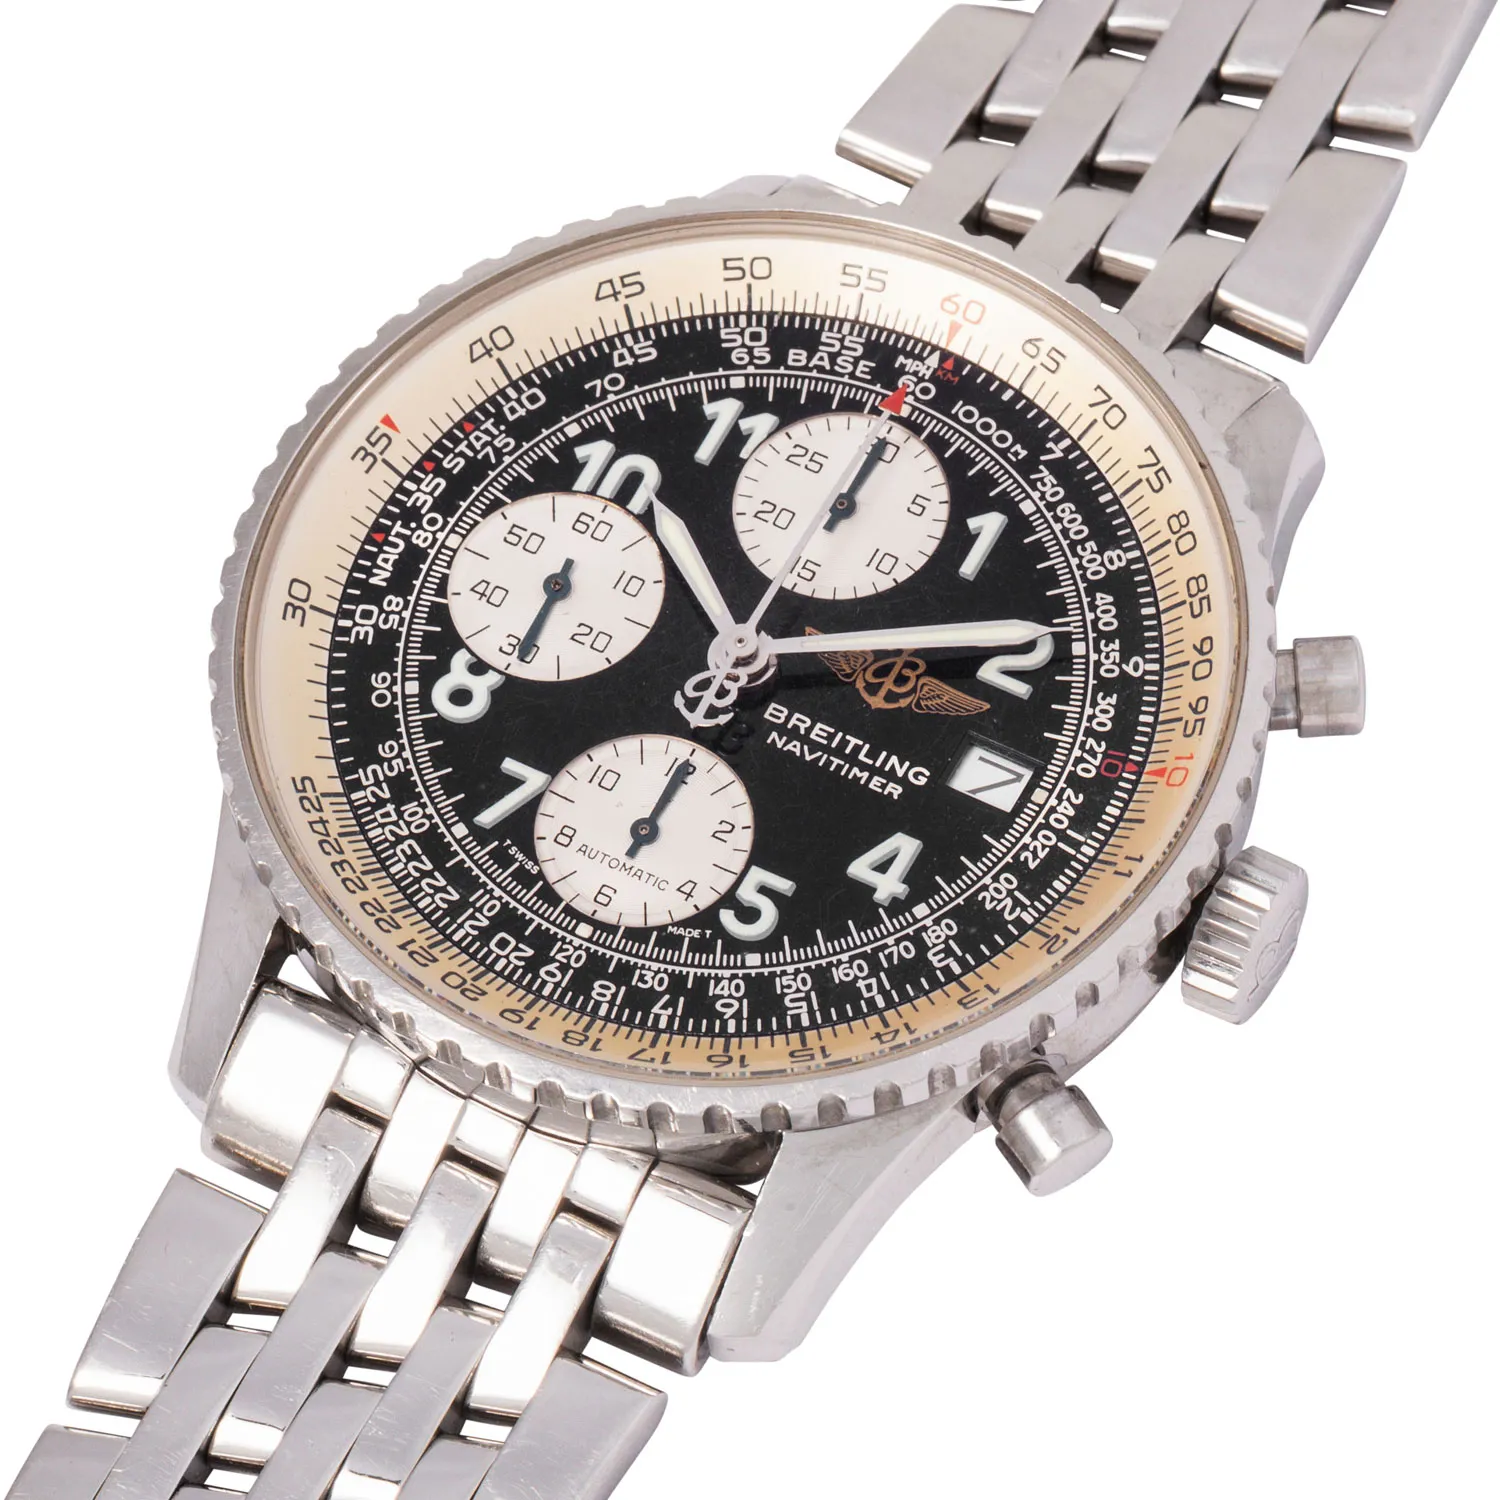 Breitling Old Navitimer A13322-165 41.5mm Stainless steel 4